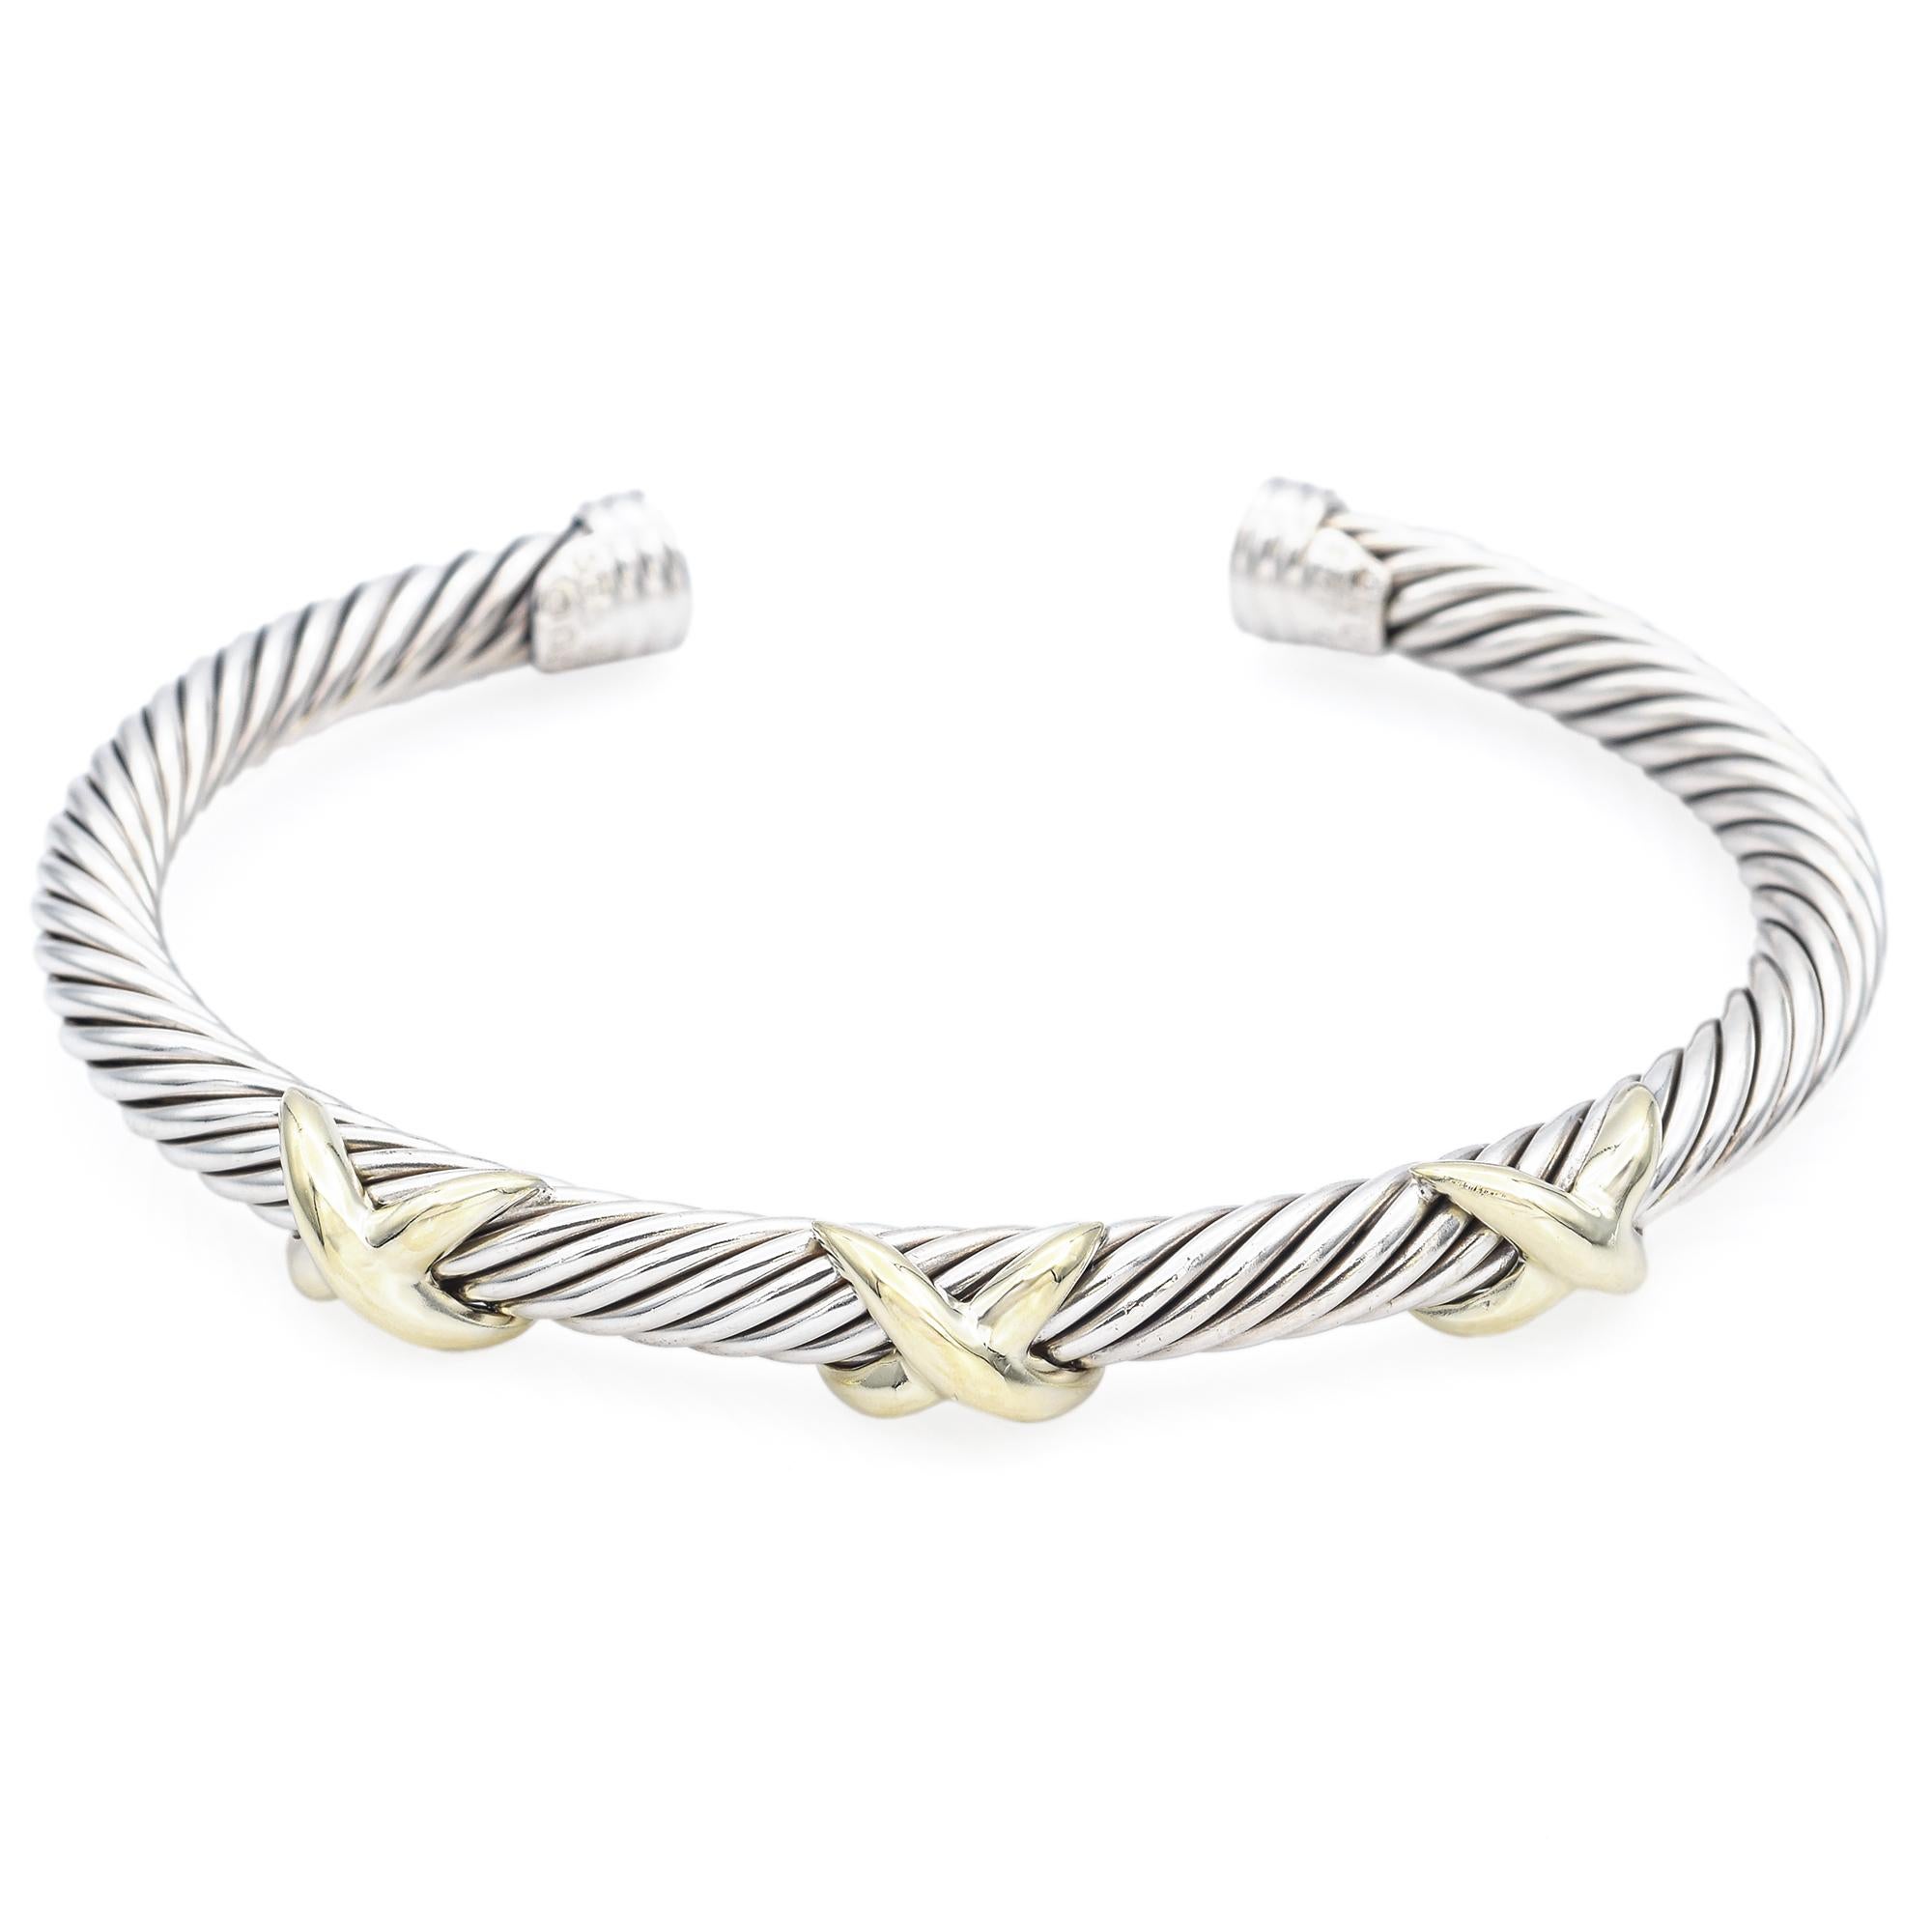 Weight:  28.3 Grams
Width: 5 mm
Bracelet Size: 6.75 Inches 
Hallmarked: D.Y 925 585

ITEM #: BR-1062-092823-10